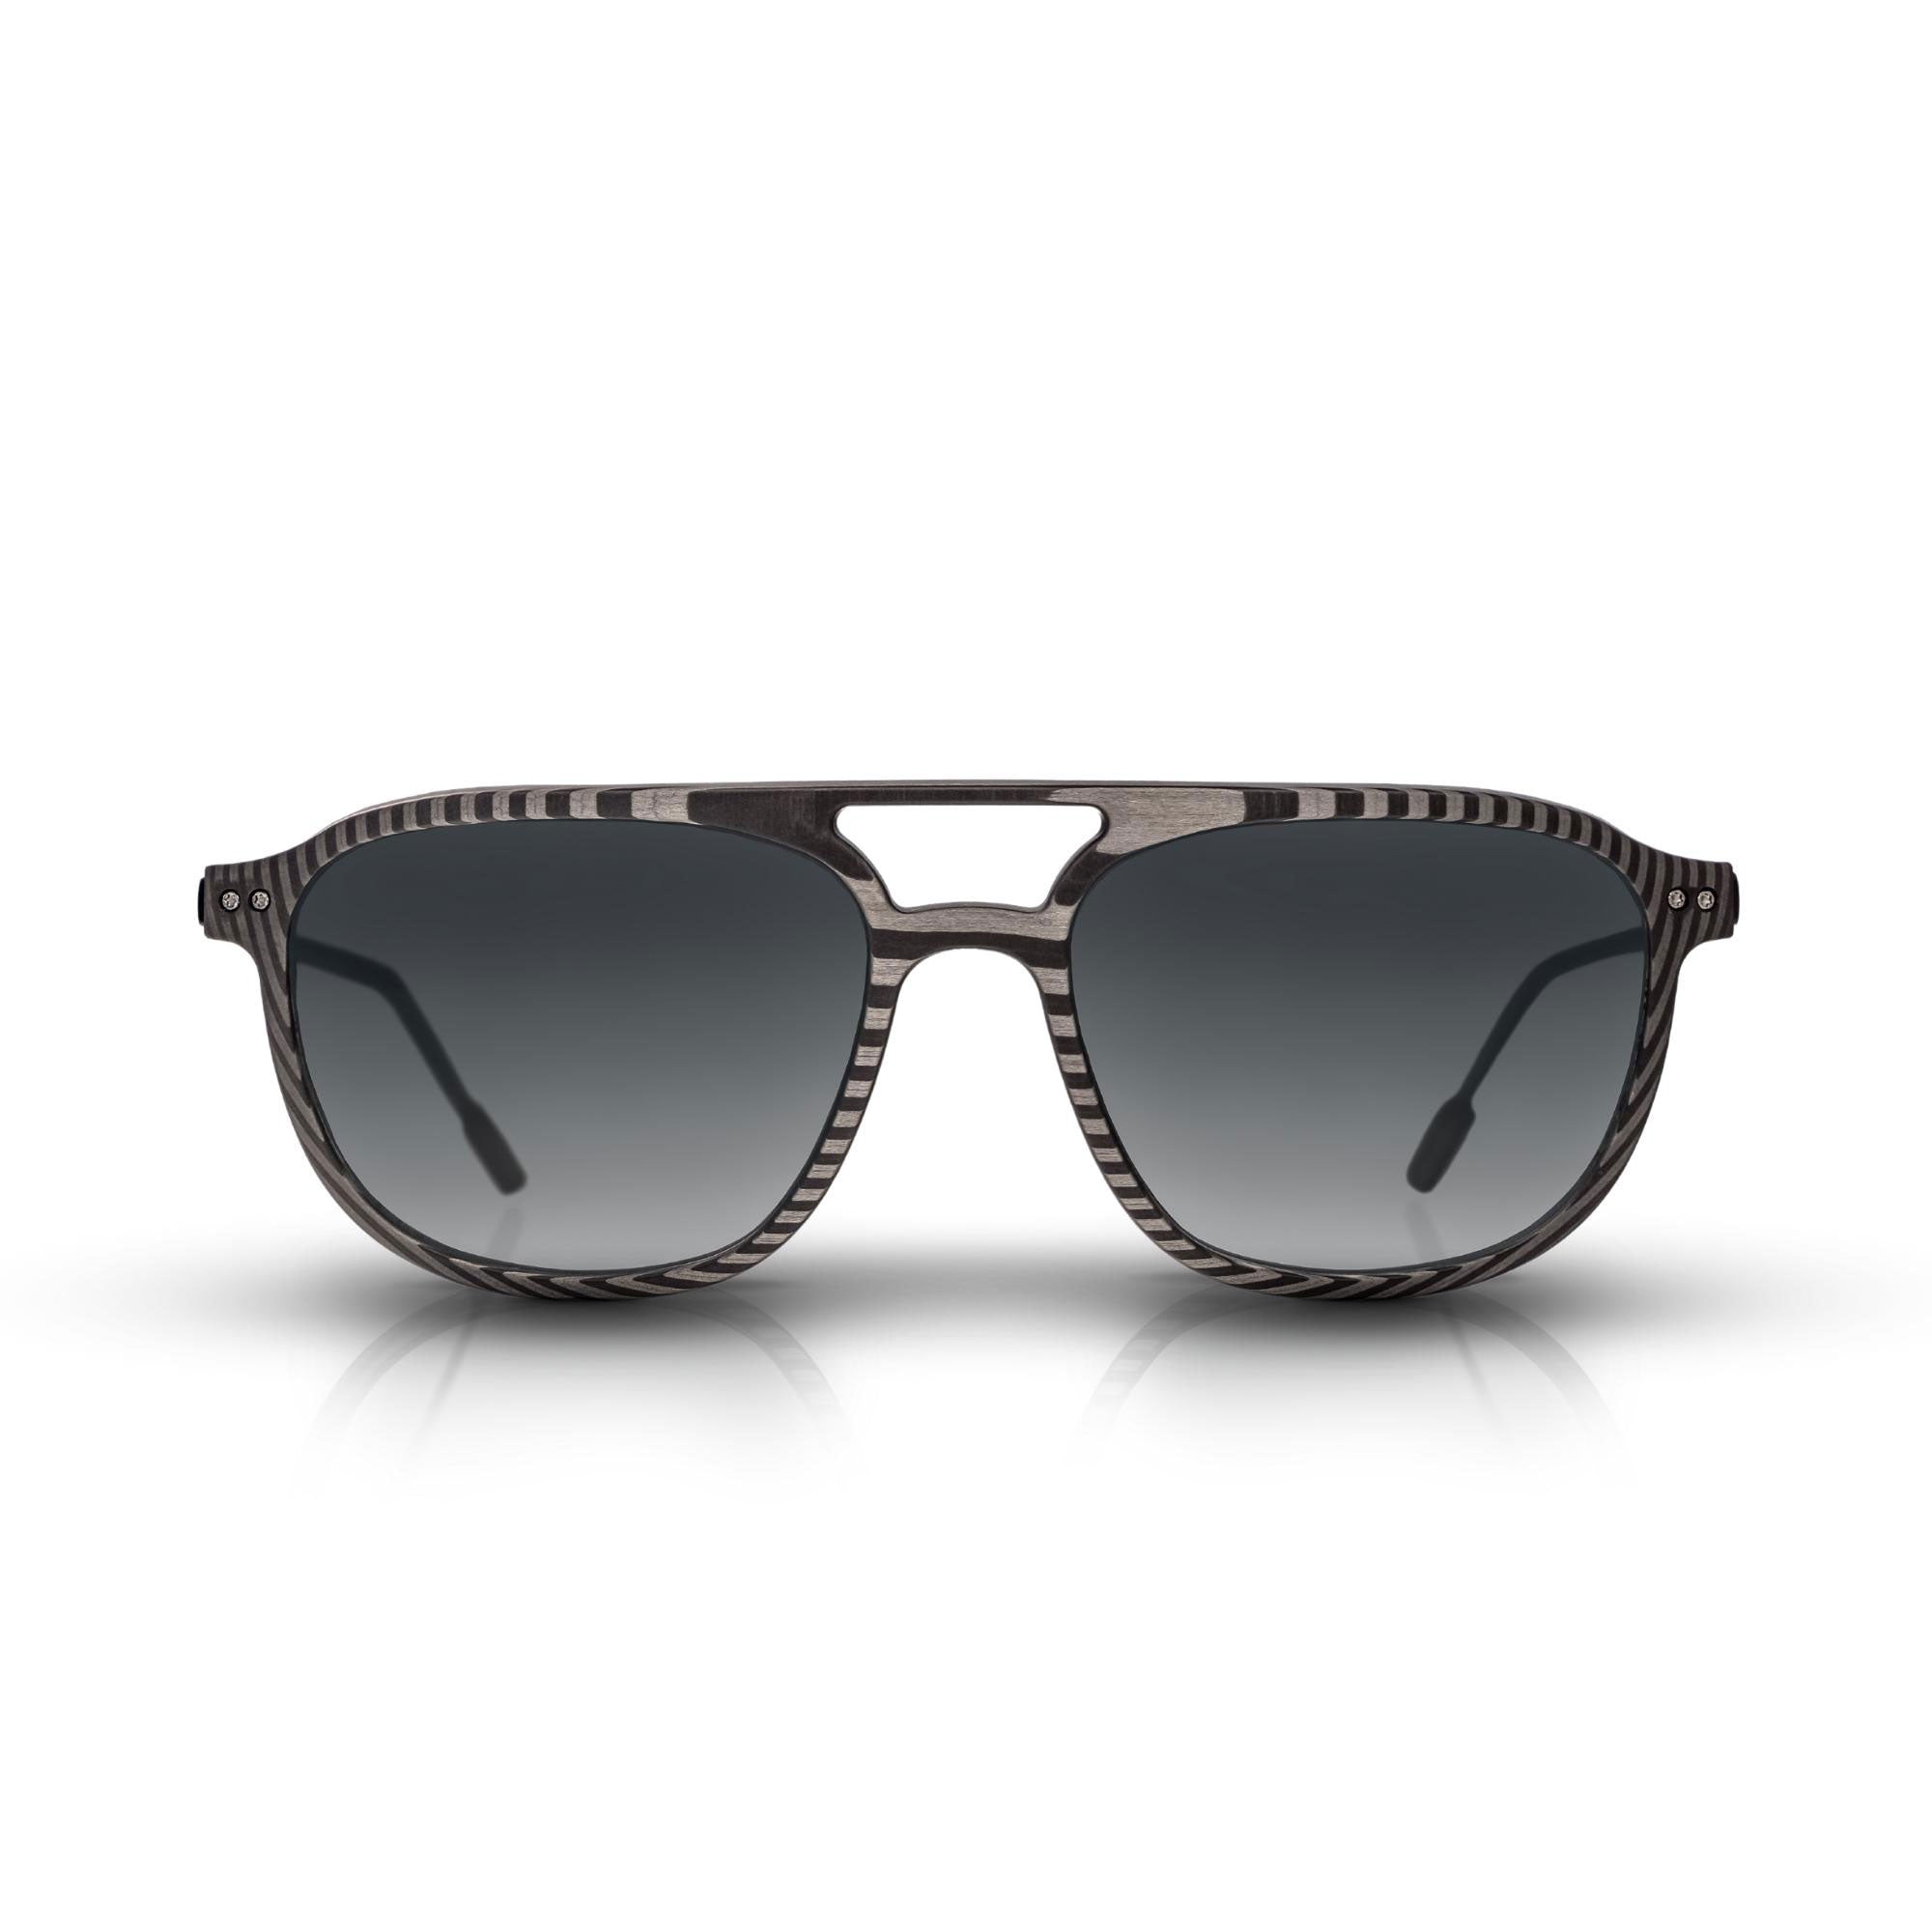 Front of the latest Roveri Eyewear The Carbon Noire from the latest Gunther Werks Collection, Vintage Pilot inspired sunglasses for men in UDCT® Machined Carbon Fiber, with dark gray gradient lenses and PVD coated Beta-Titanium frame, handmade in Italy.